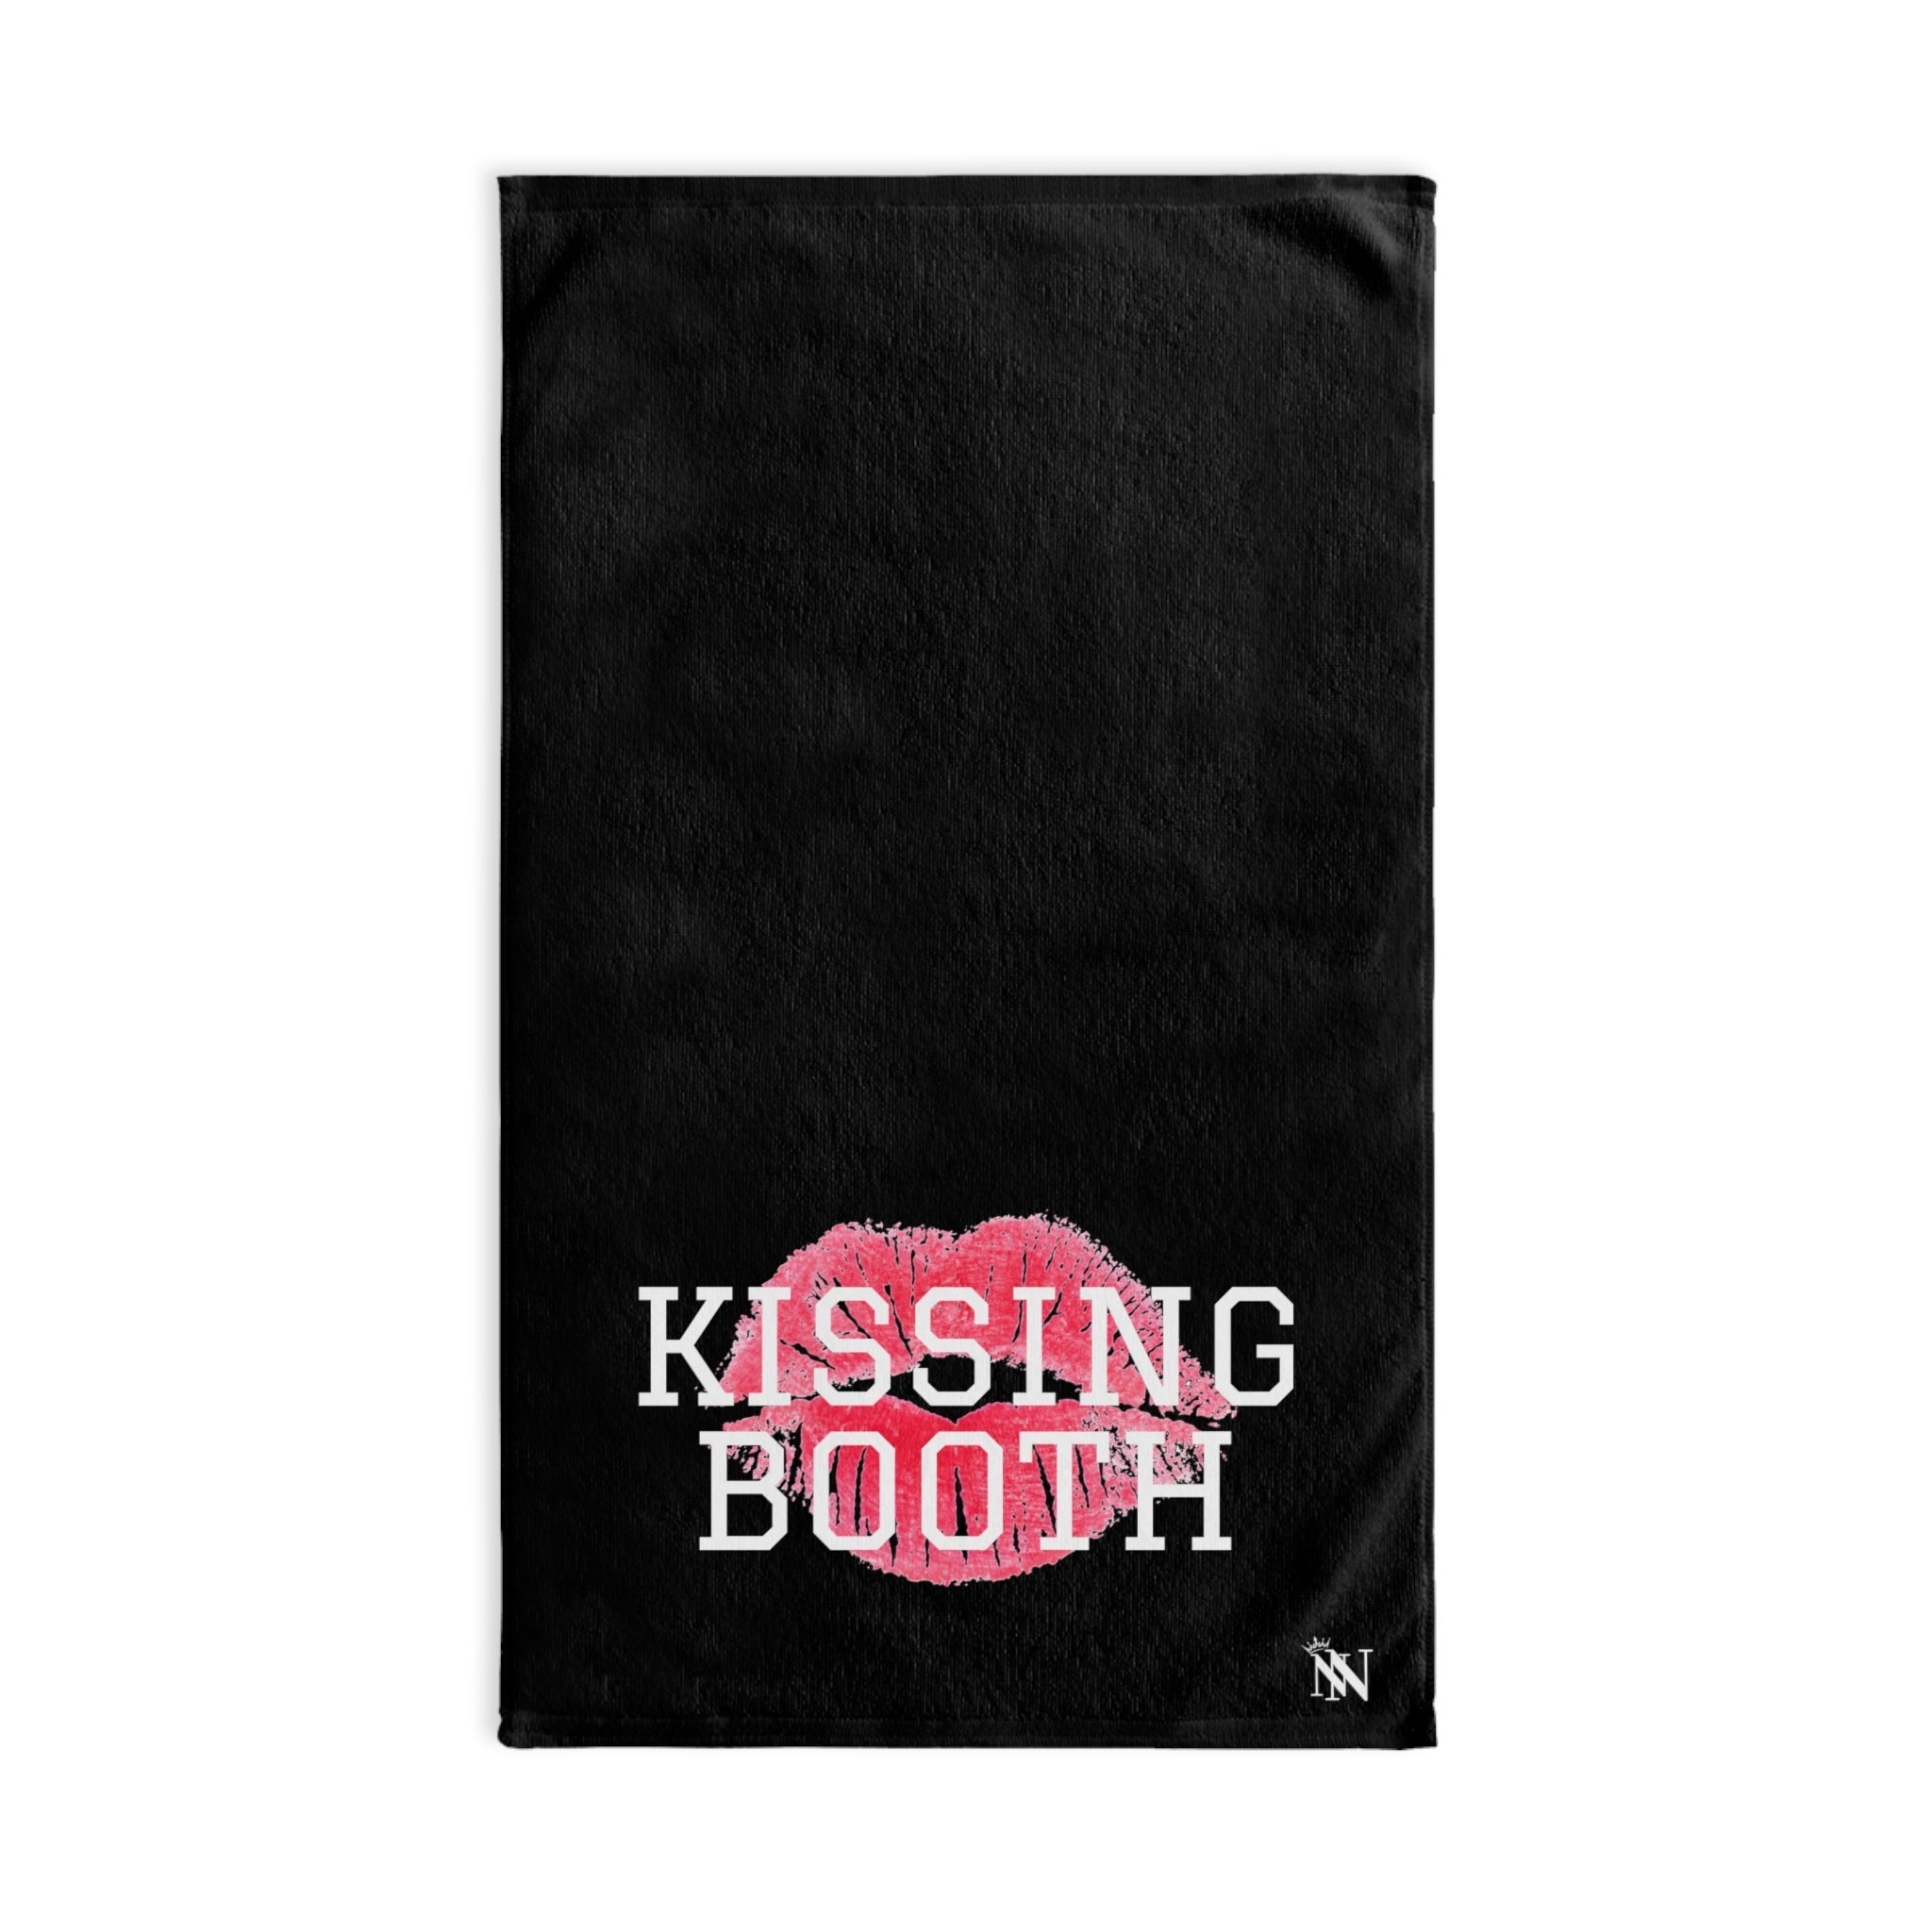 Kissing Booth LipsBlack | Sexy Gifts for Boyfriend, Funny Towel Romantic Gift for Wedding Couple Fiance First Year 2nd Anniversary Valentines, Party Gag Gifts, Joke Humor Cloth for Husband Men BF NECTAR NAPKINS